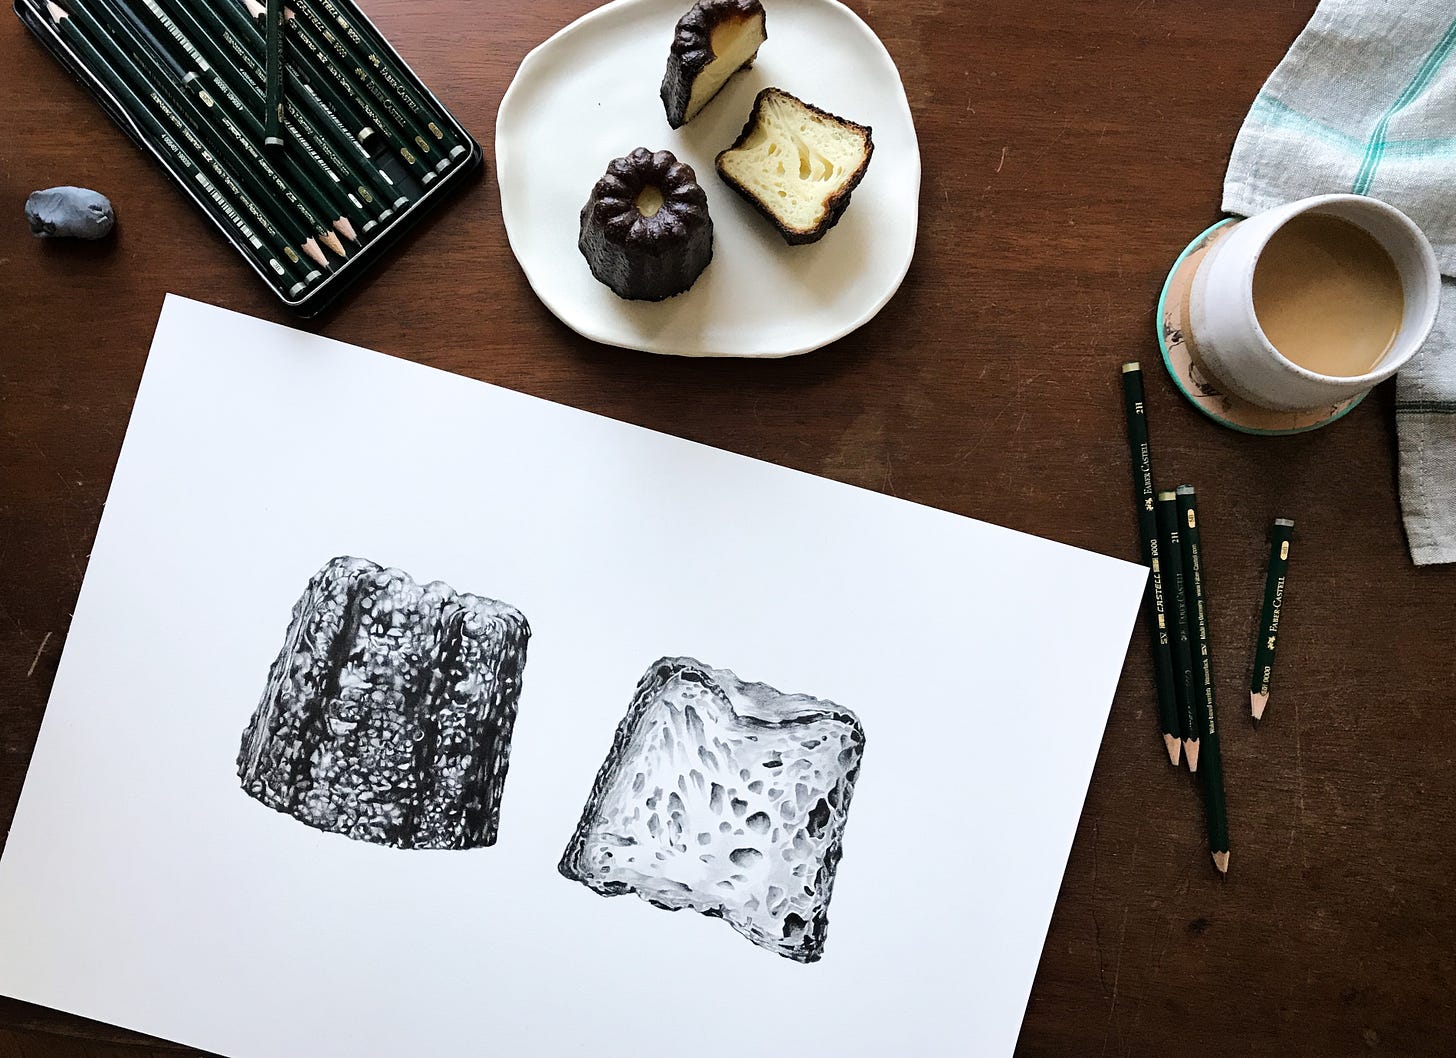 A birds eye view of a drawing of a canele pastry, with pencils to the top right, a plate with actual canele top center and a cup of coffee to the top right. Pencils and an eraser lay scattered on the wooden desk next to the drawing